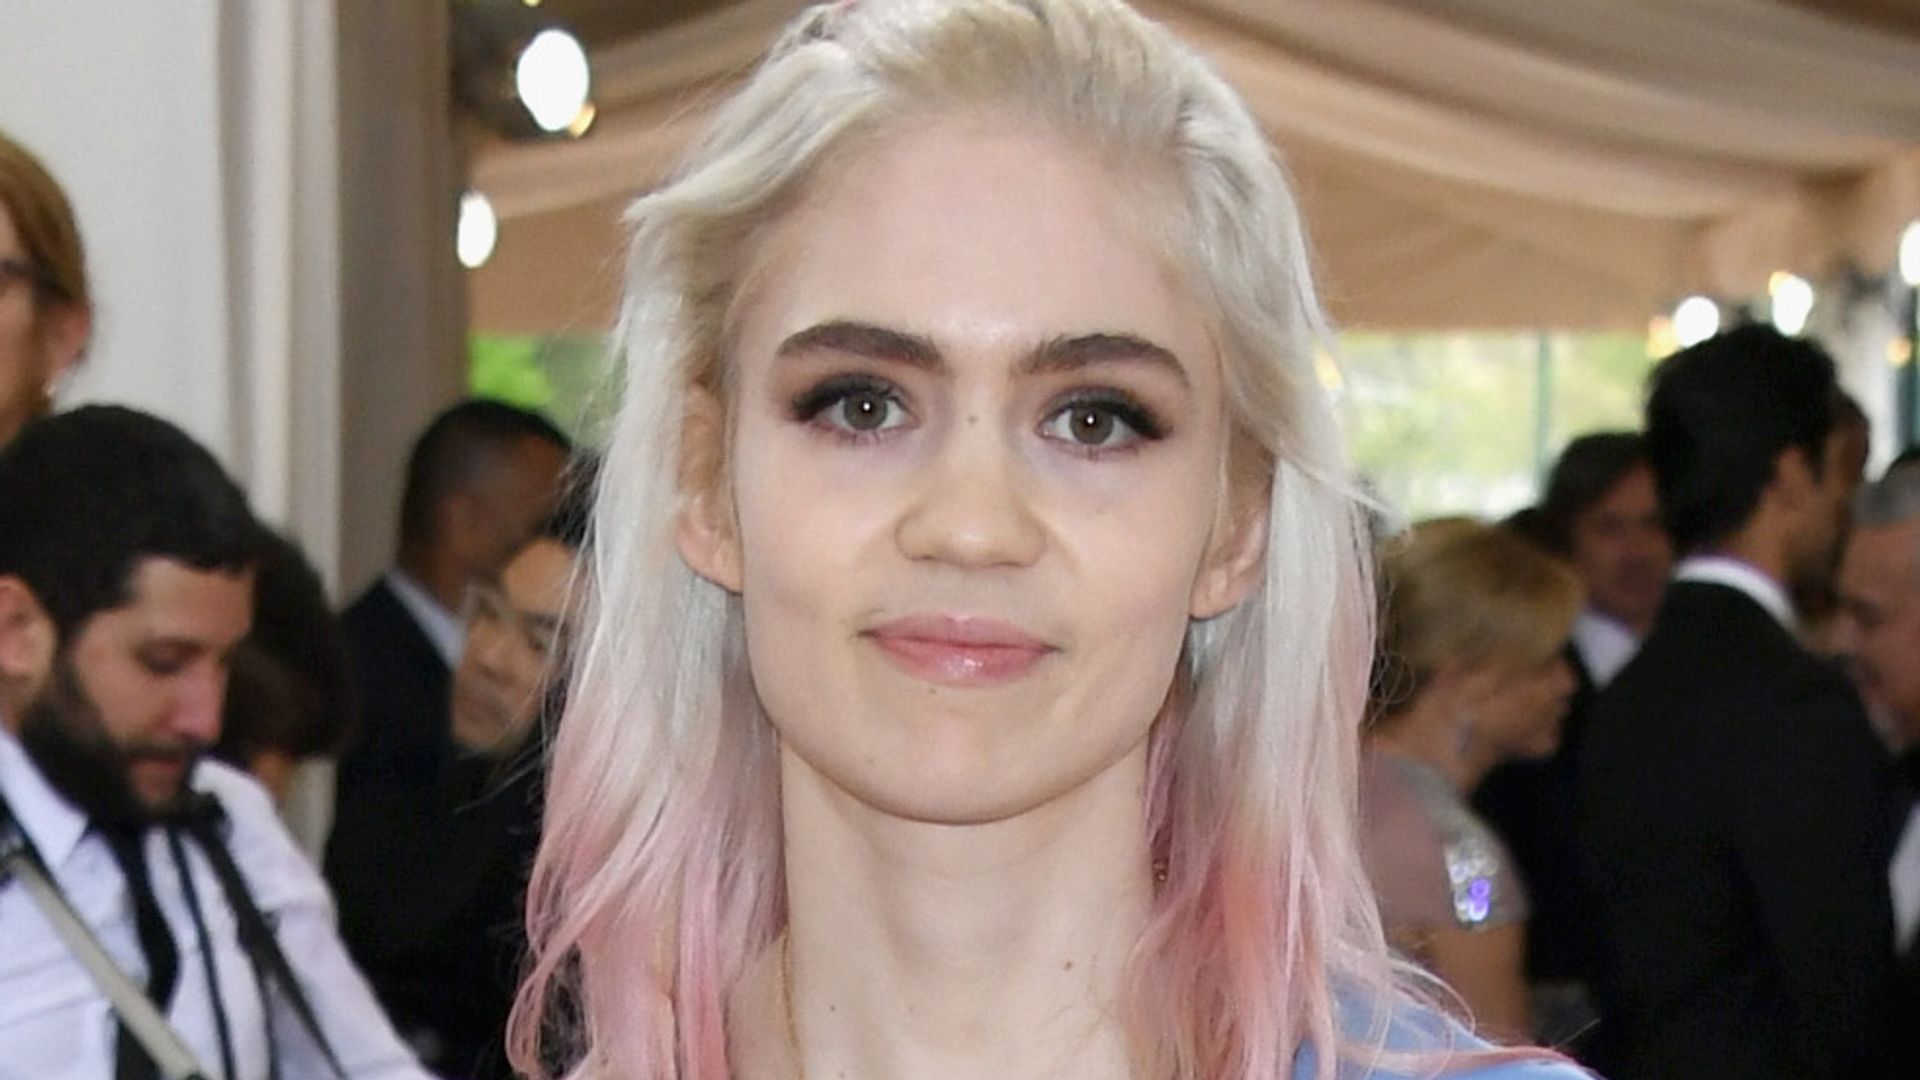 Singer Grimes in a blue silky dress with blonde and pink hair